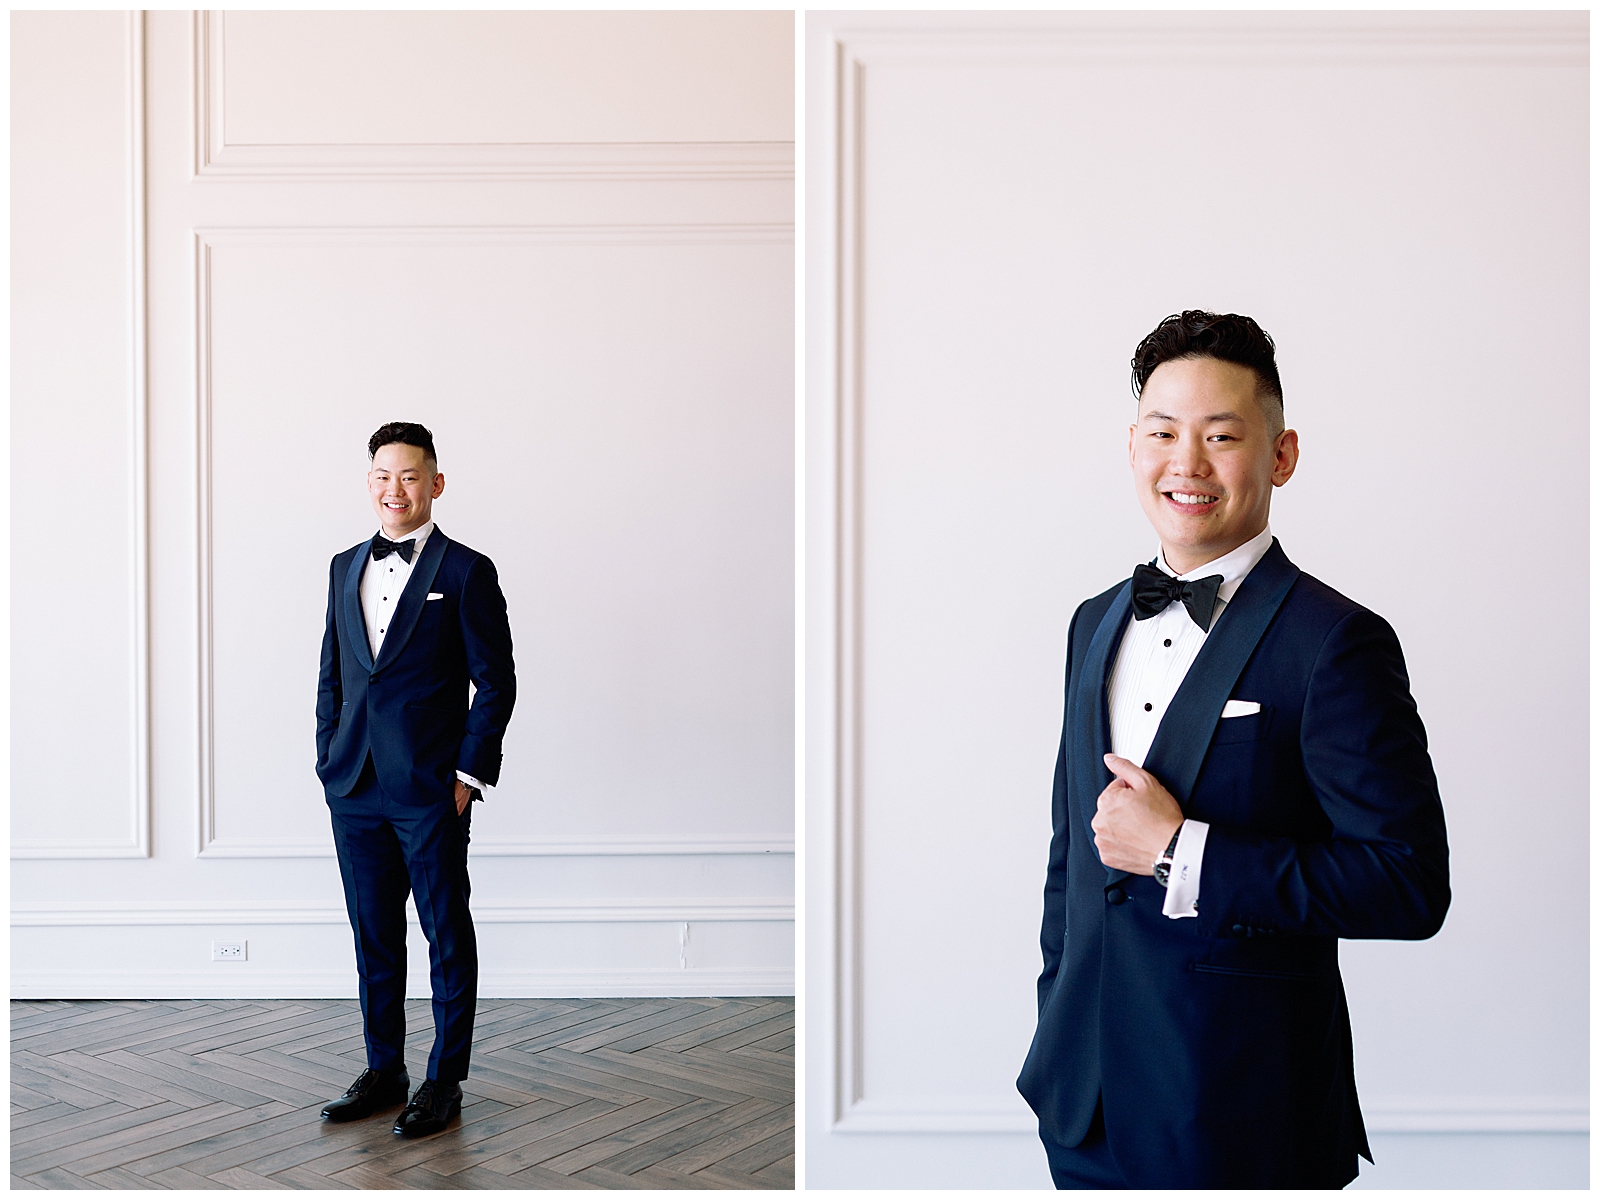 Groom Smiling Happy Editorial Sophisticated Cool Toronto at Arlington Estate Wedding Venue, Summer Intimate Elopement| Jacqueline James Photography for modern wild romantics